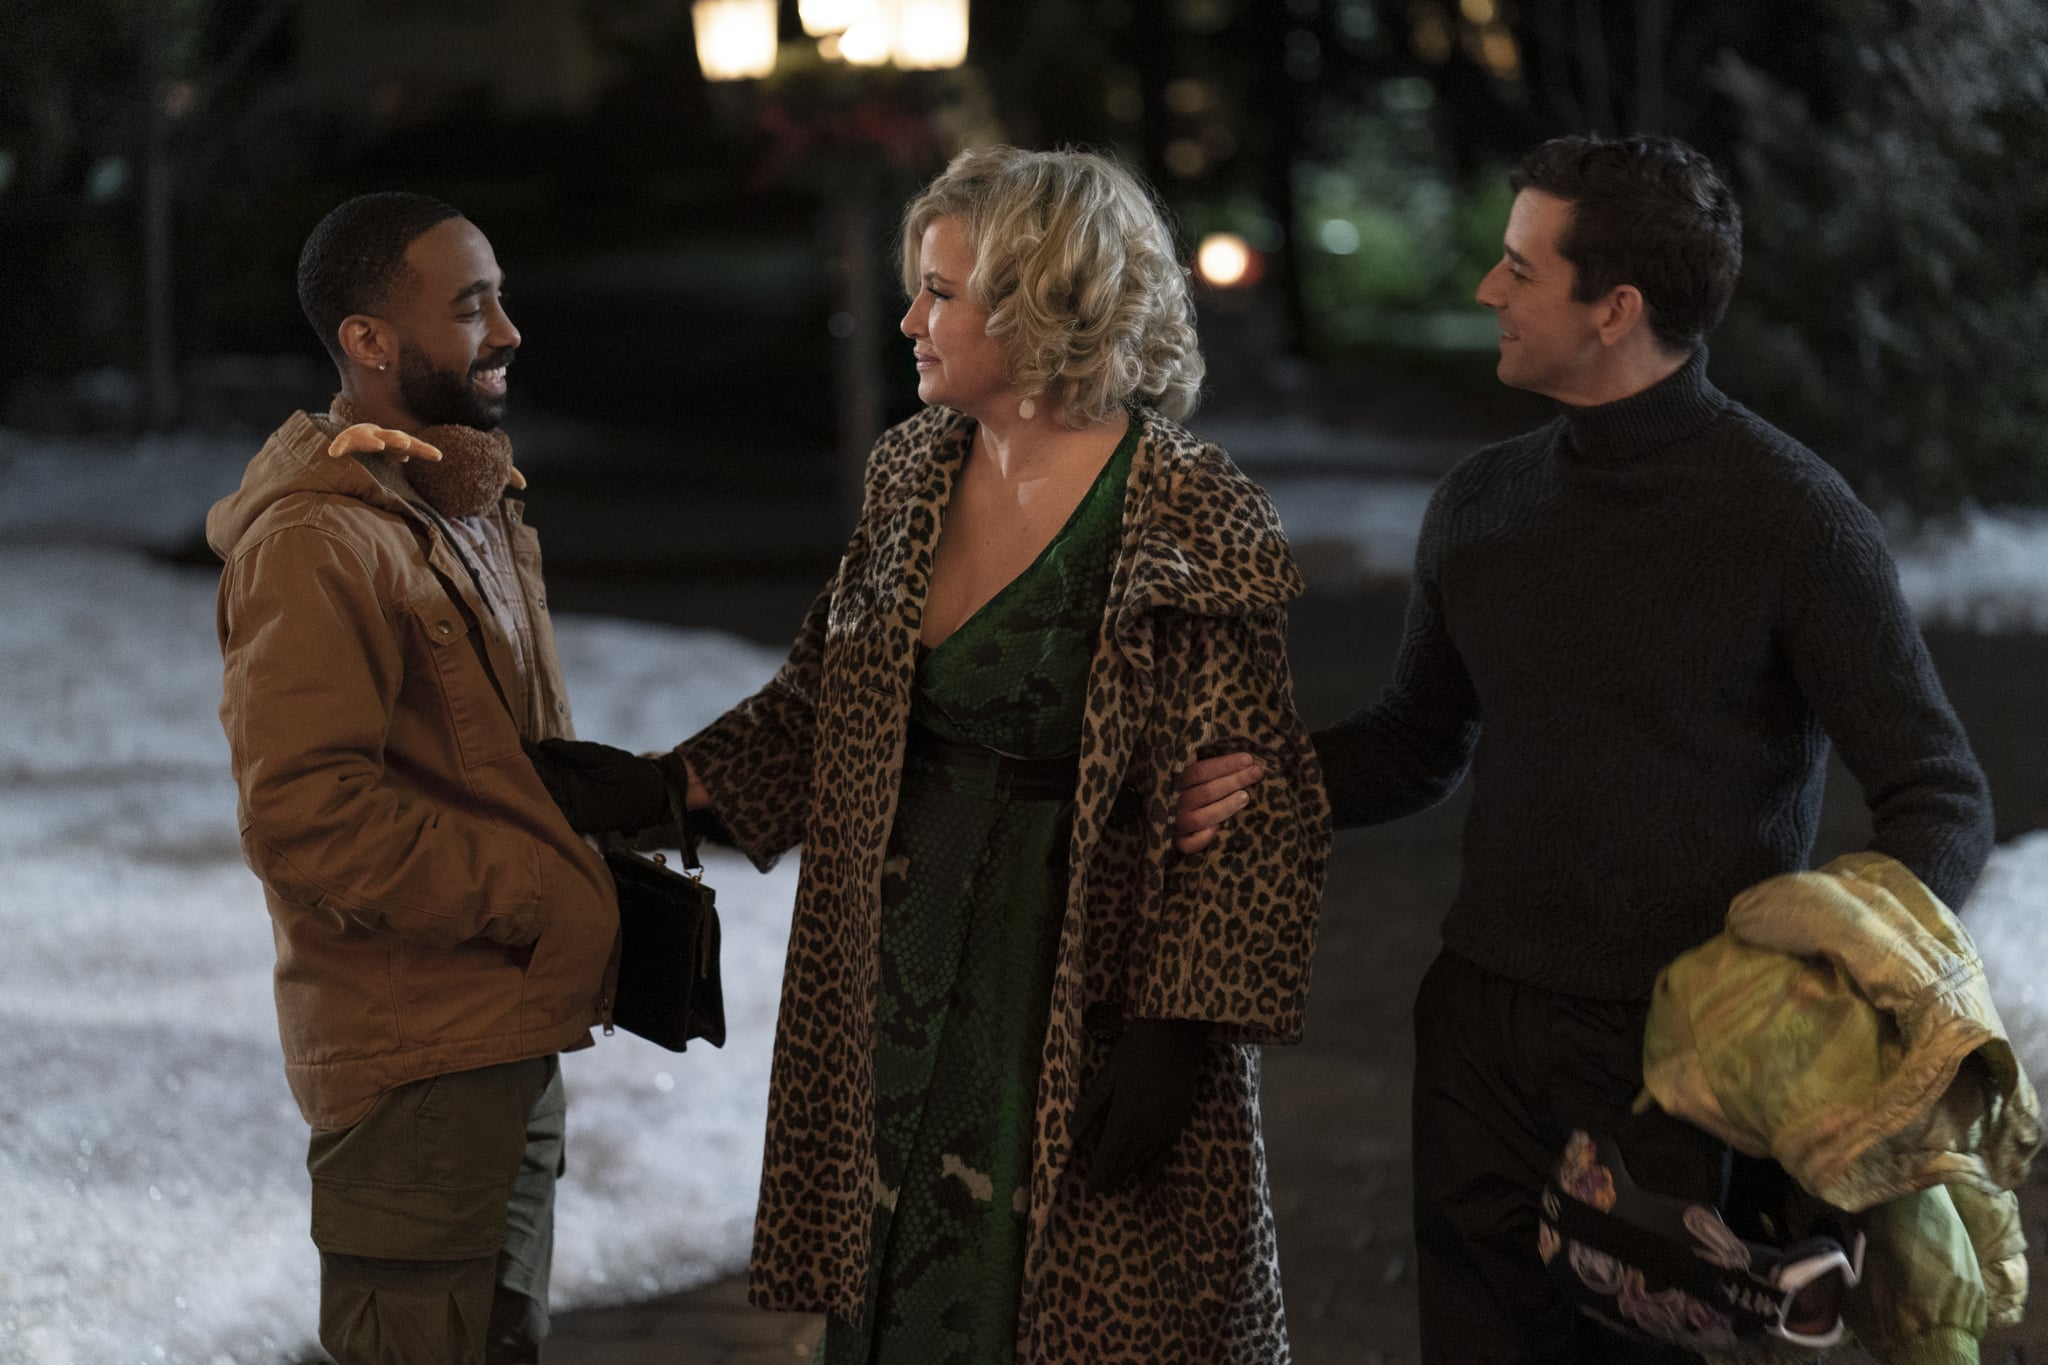 Single All The Way (L-R).   Michael Urie as Peter, Jennifer Coolidge as Aunt Sandy, Philemon Chambers as Nick, in Single All The Way. Cr. Philippe Bosse/Netflix © 2021